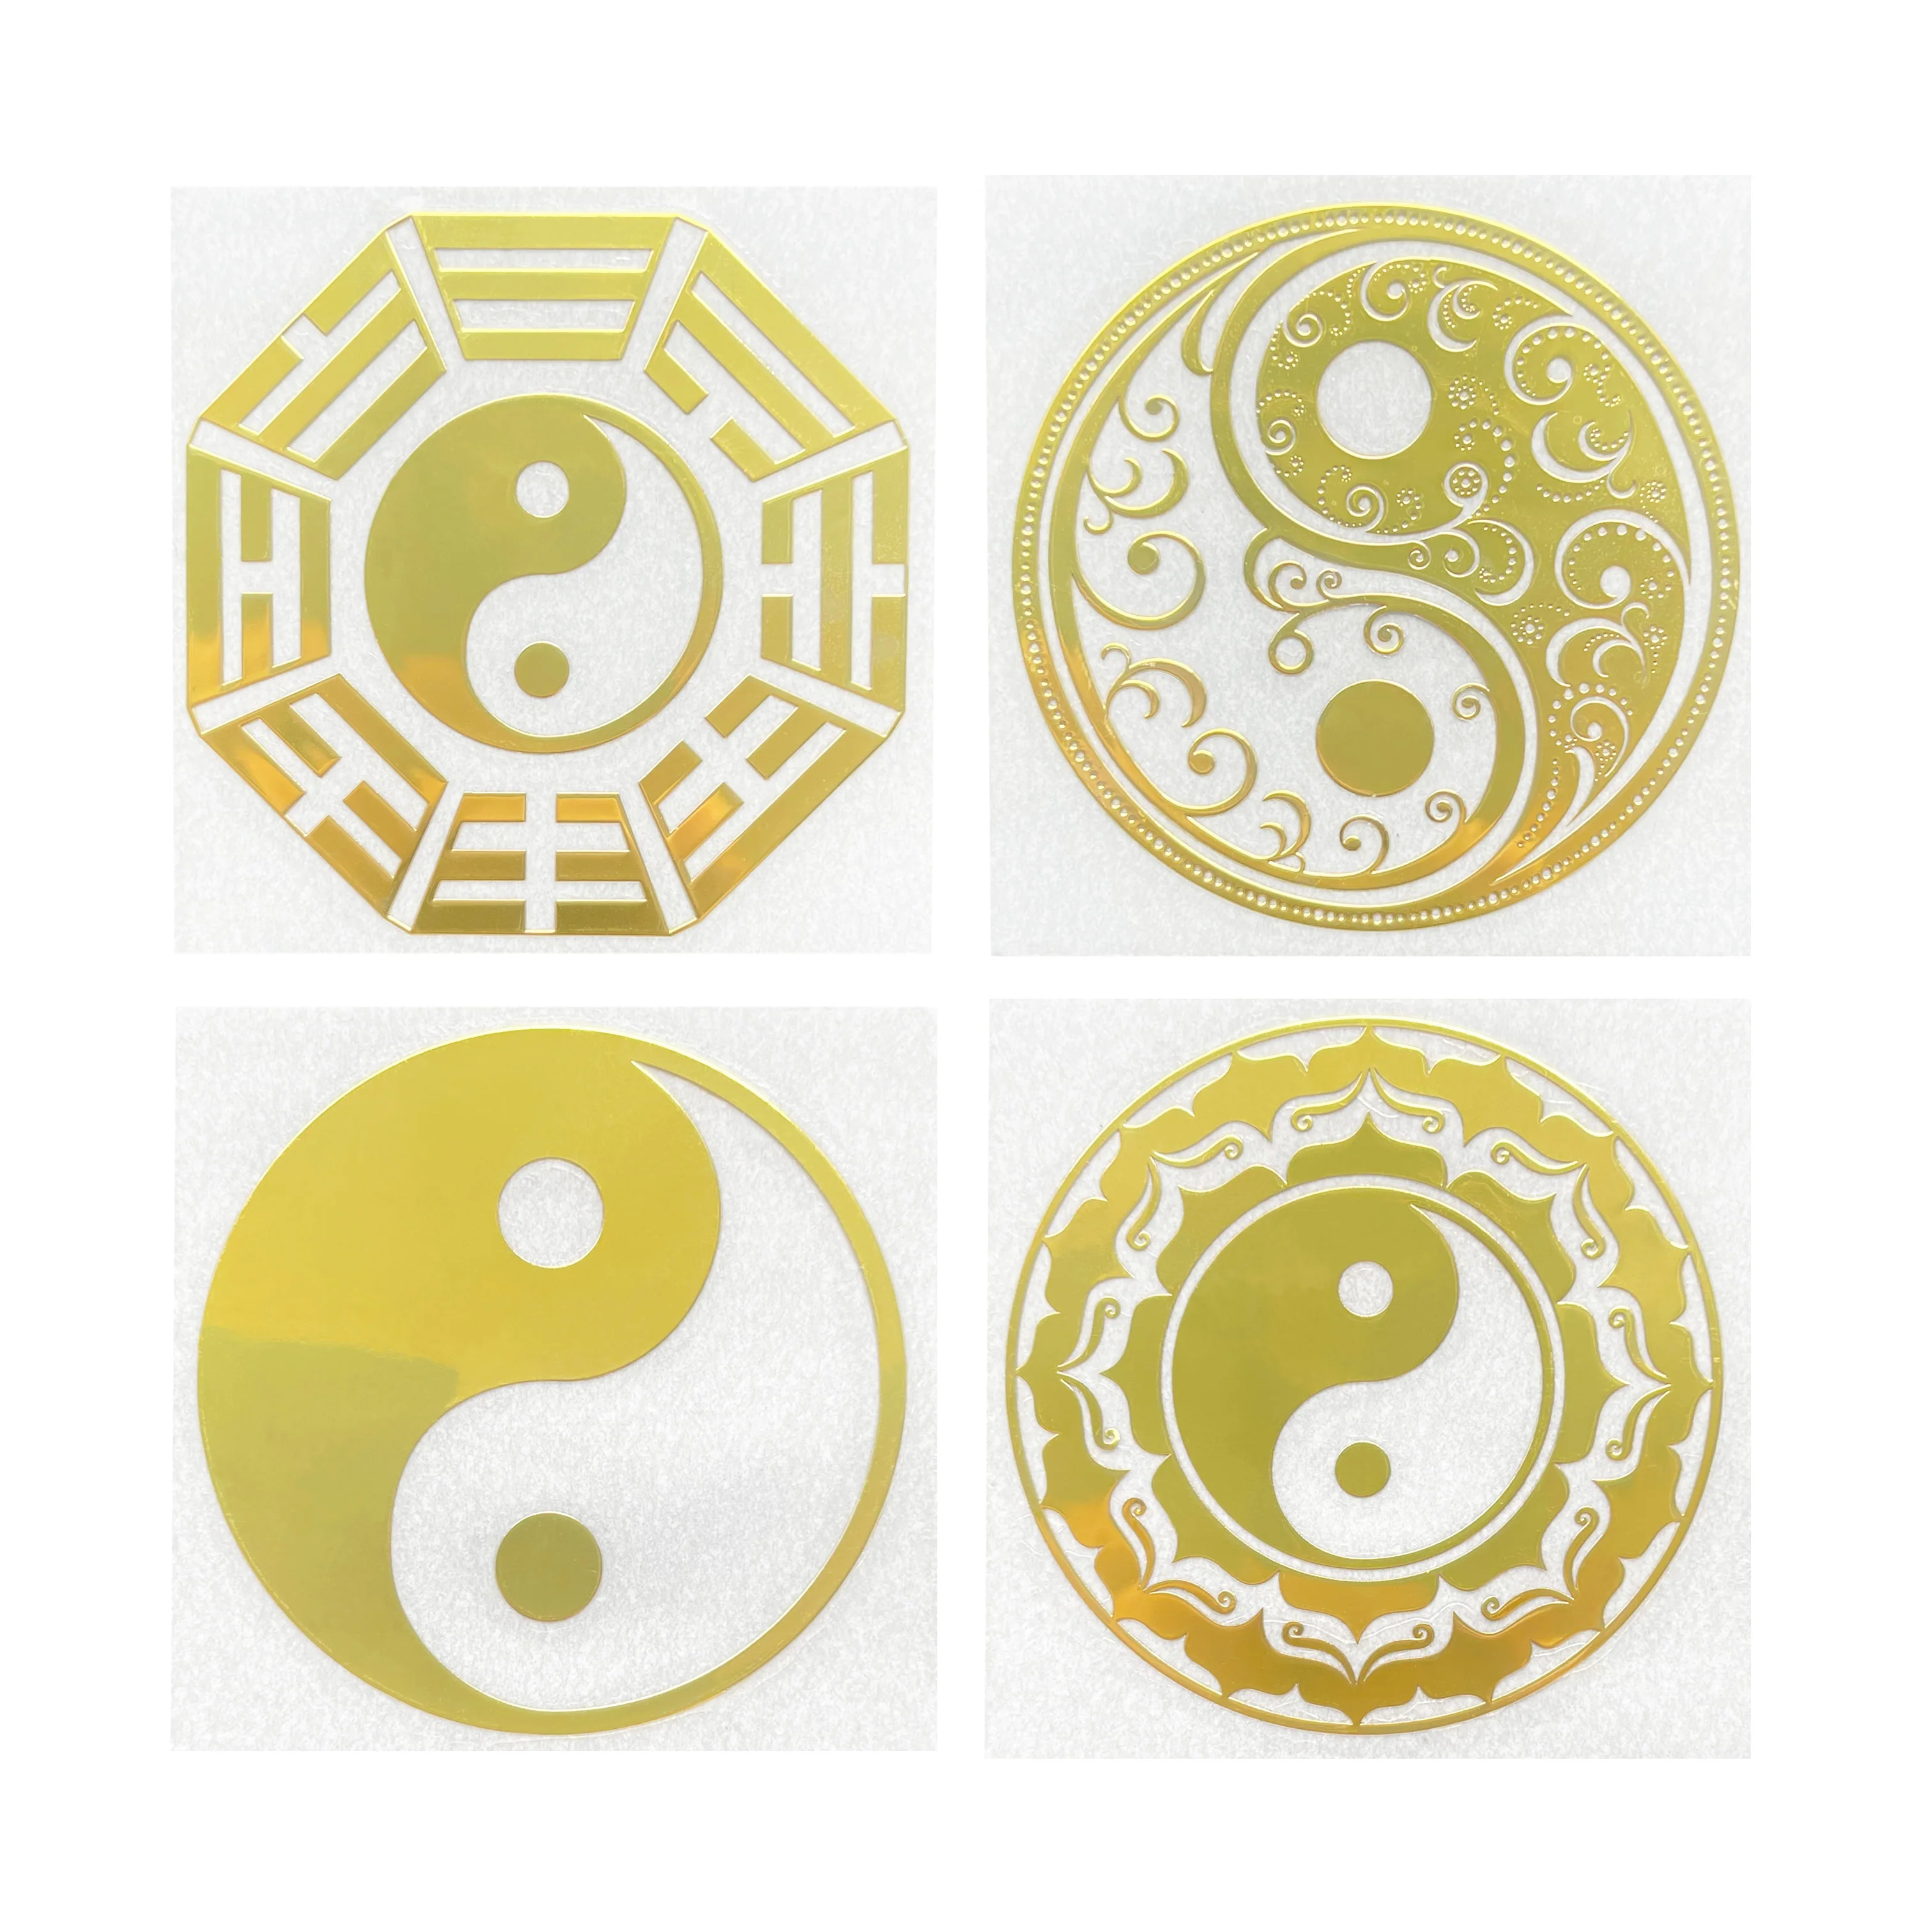 

Five elements Yin and Yang Tai Chi Eight diagrams pattern metal stickers mobile phone stickers laptop car stickers decoration